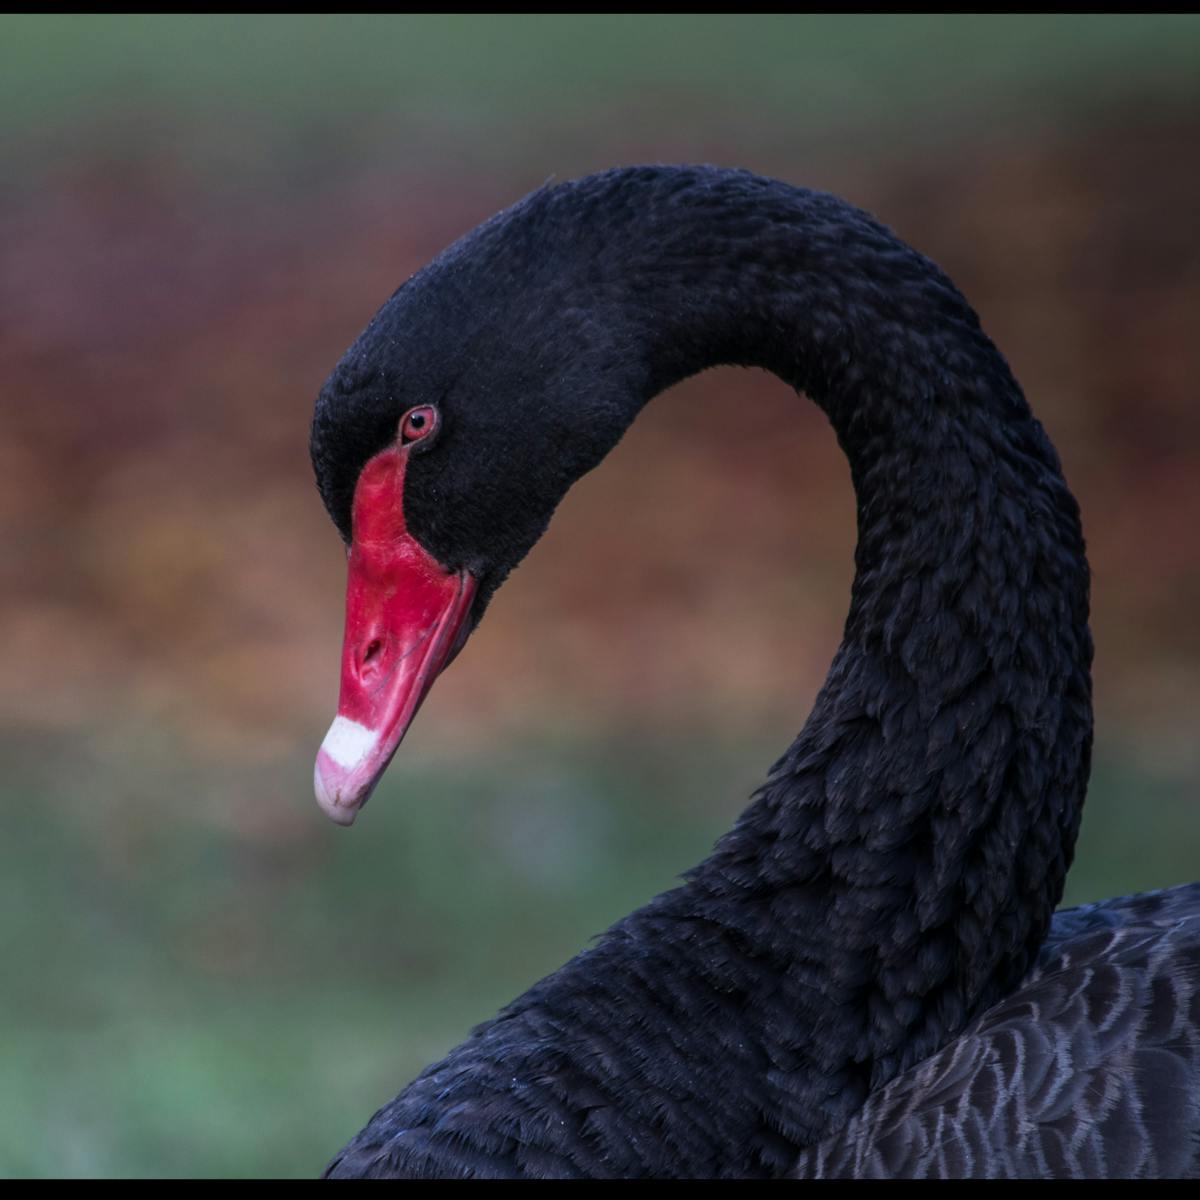 Træts webspindel invadere pille Coronavirus is significant, but is it a true black swan event?